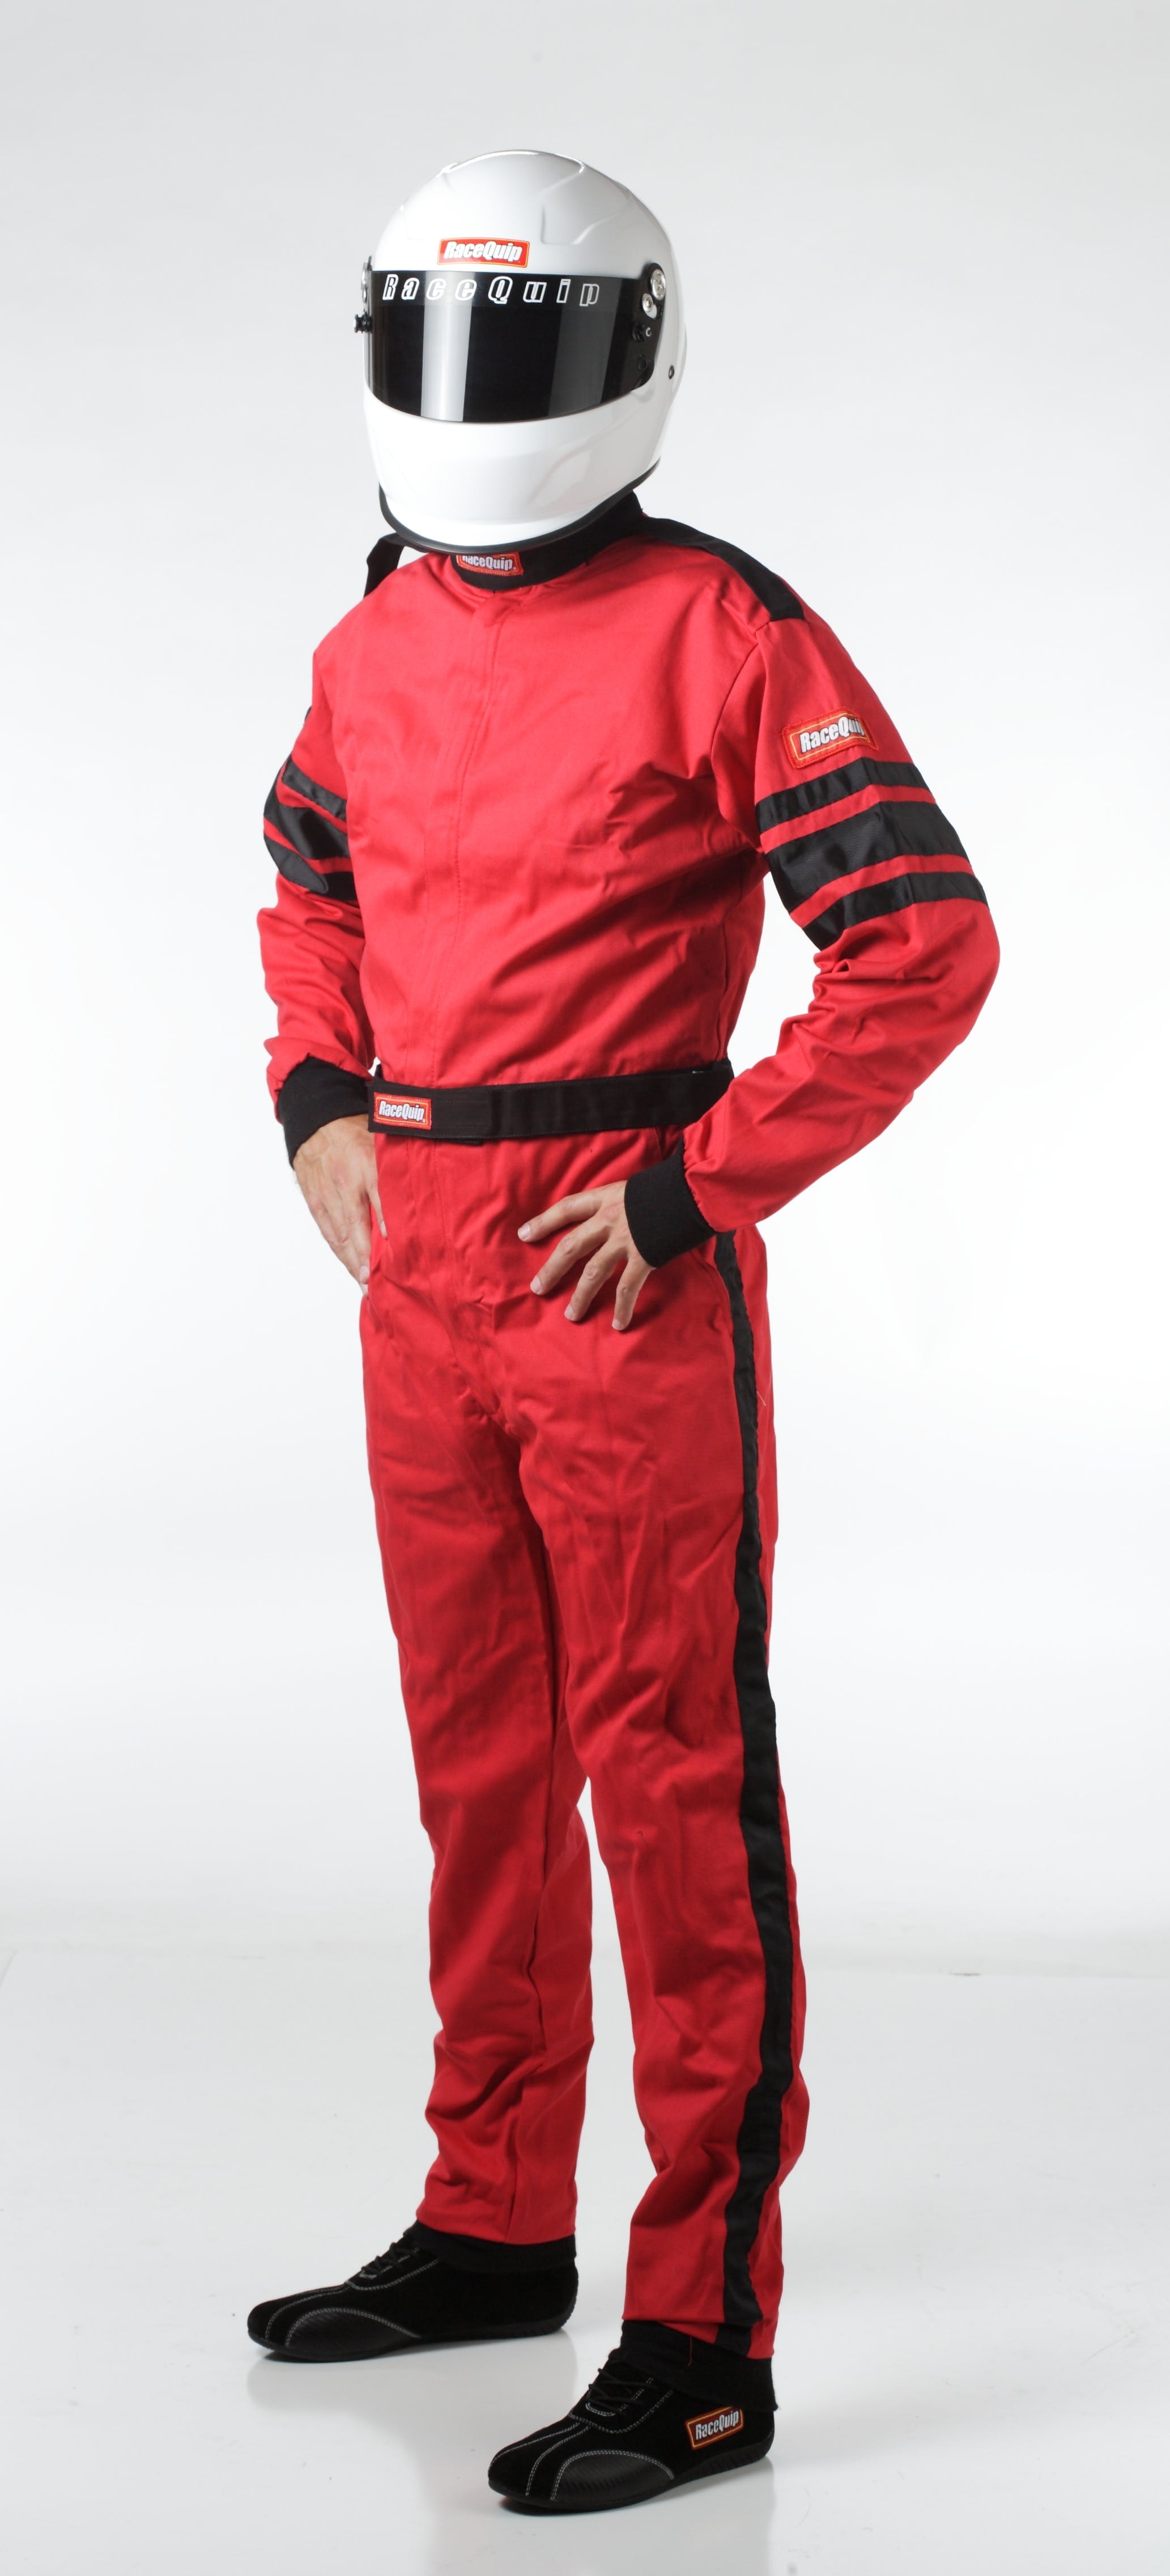 RaceQuip 110013 SFI-1 Pyrovatex One-Piece Single-Layer Racing Fire Suit (Red, Medium)